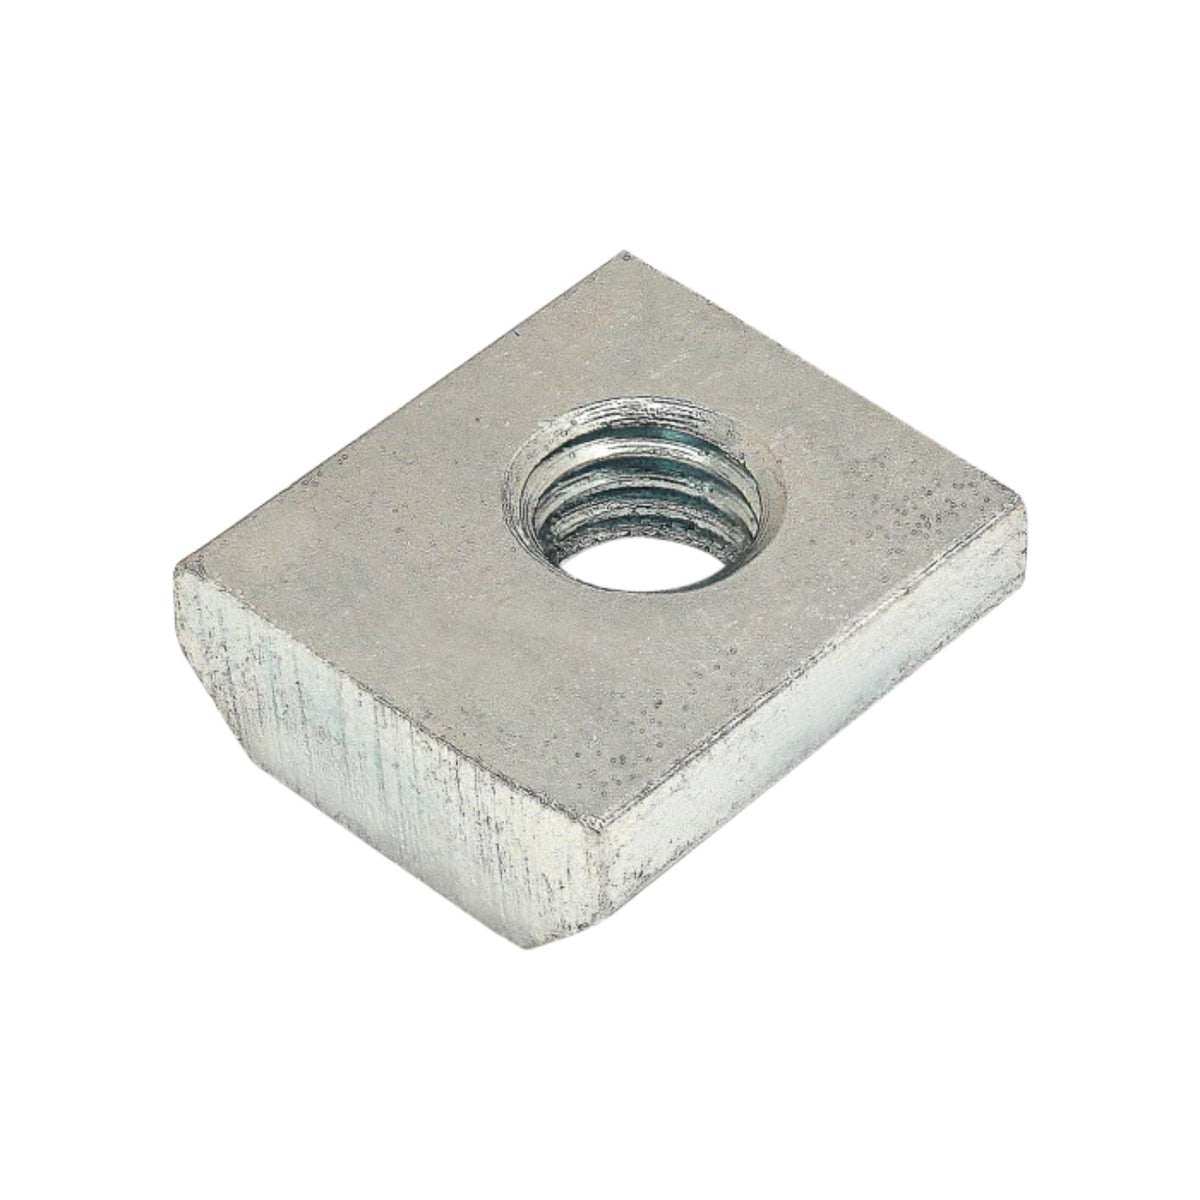 square metal t-nut with flat top and a threaded hole